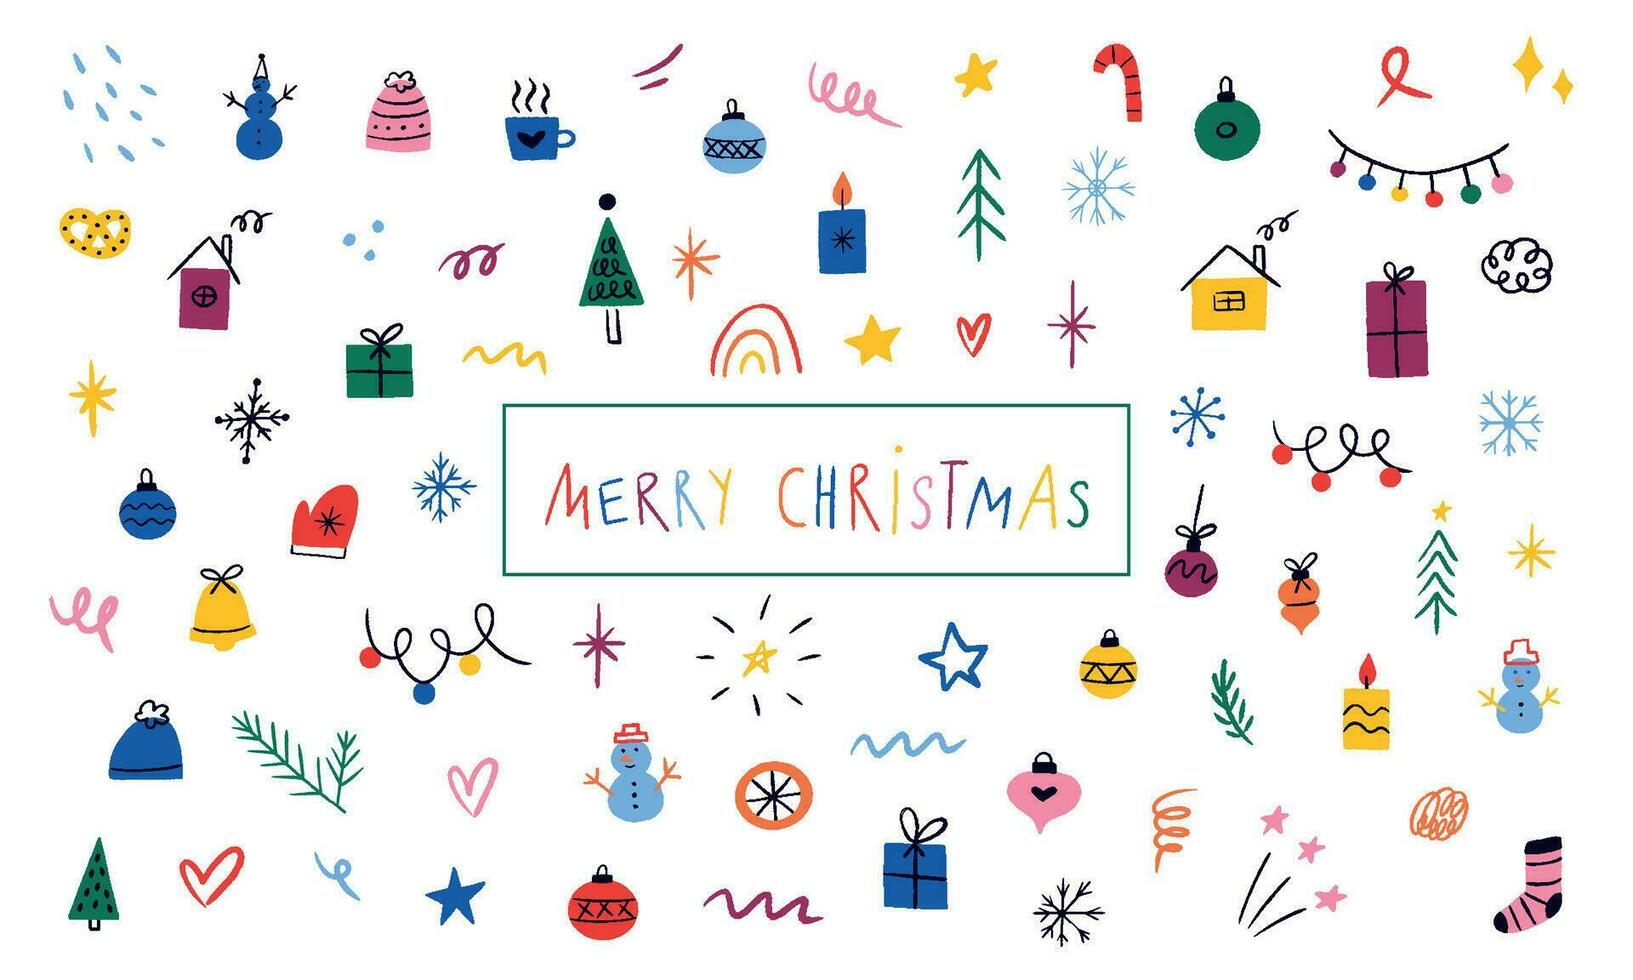 Hand drawn set Christmas decorative elements. New year doodles for banners, greeting cards, wrapping paper, invitations vector